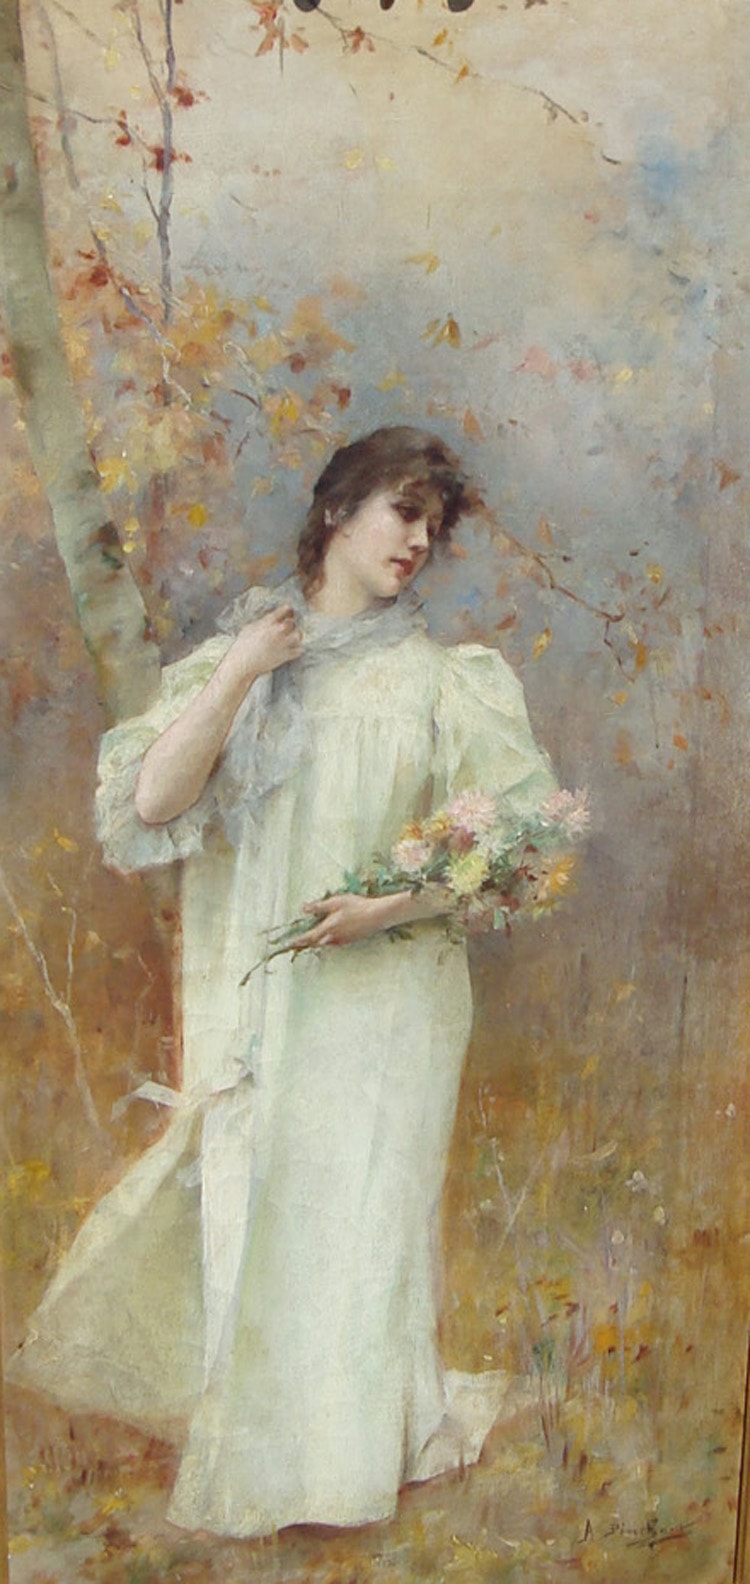 “Lady in Field with Flowers”